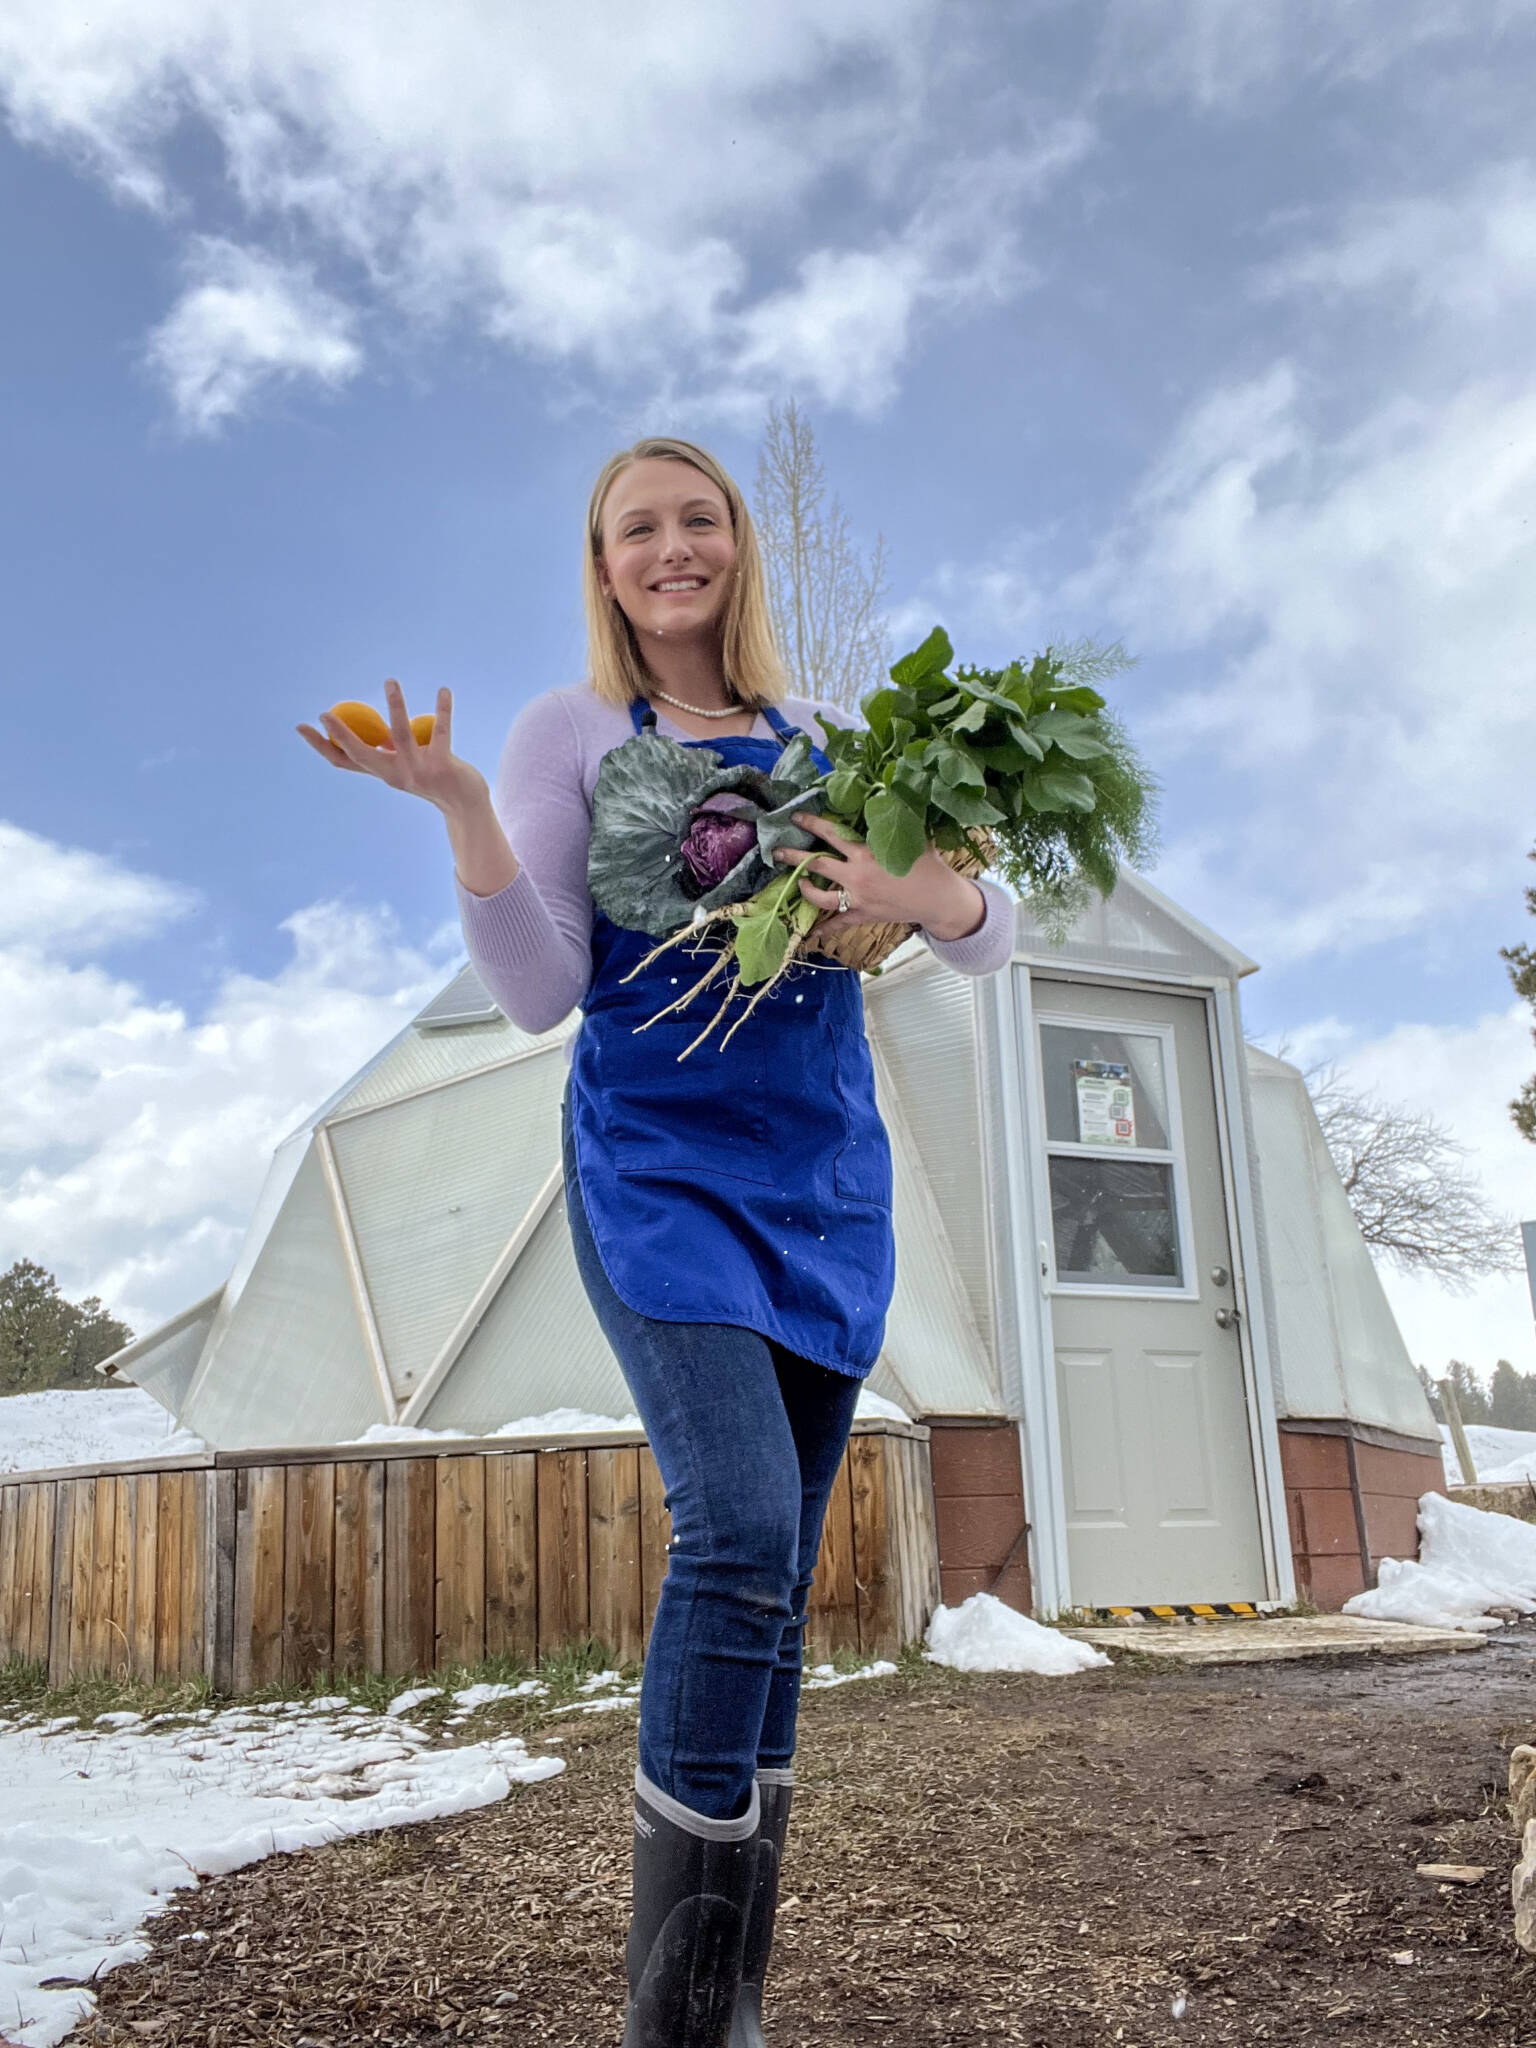 Shelby Lucero in front of an 18' Growing Dome greenhouse holding fresh produce in the winter.